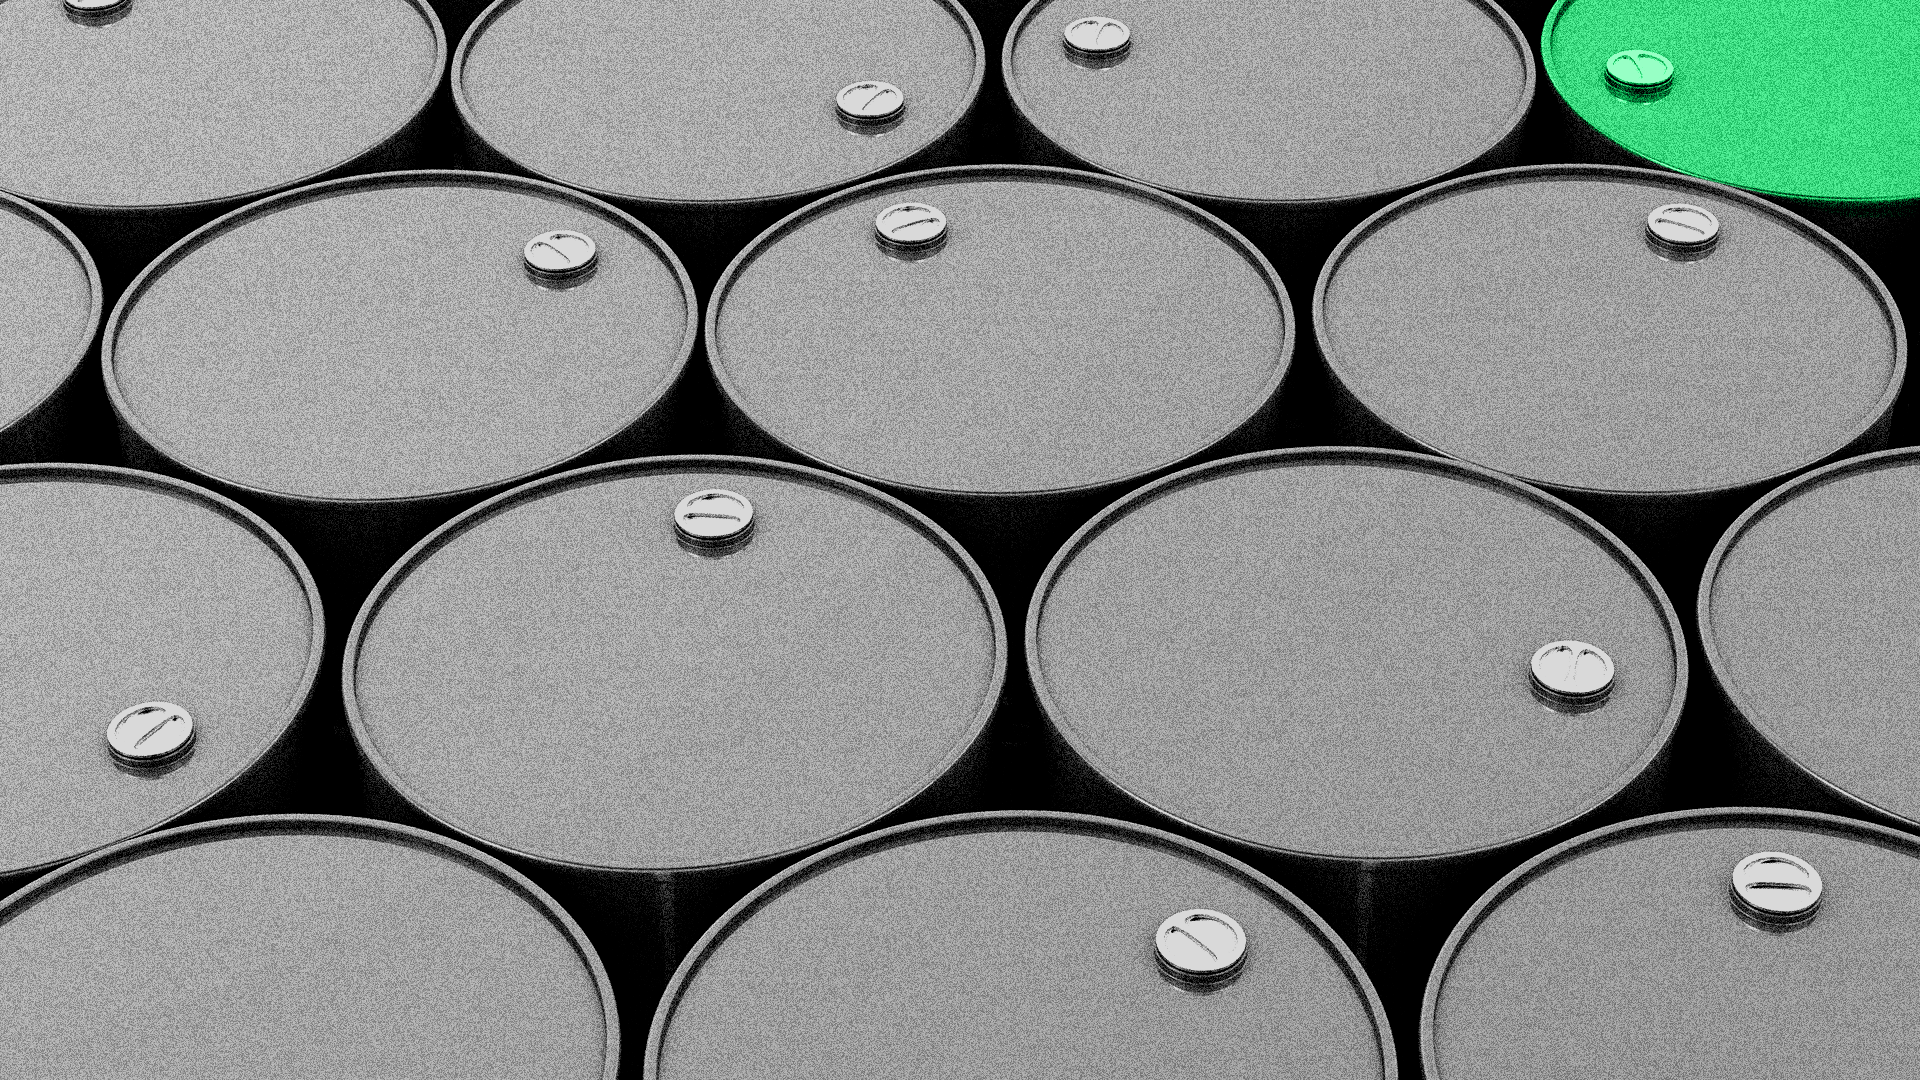 Illustration of a group of oil barrels with one in the right top corner being highlighted green